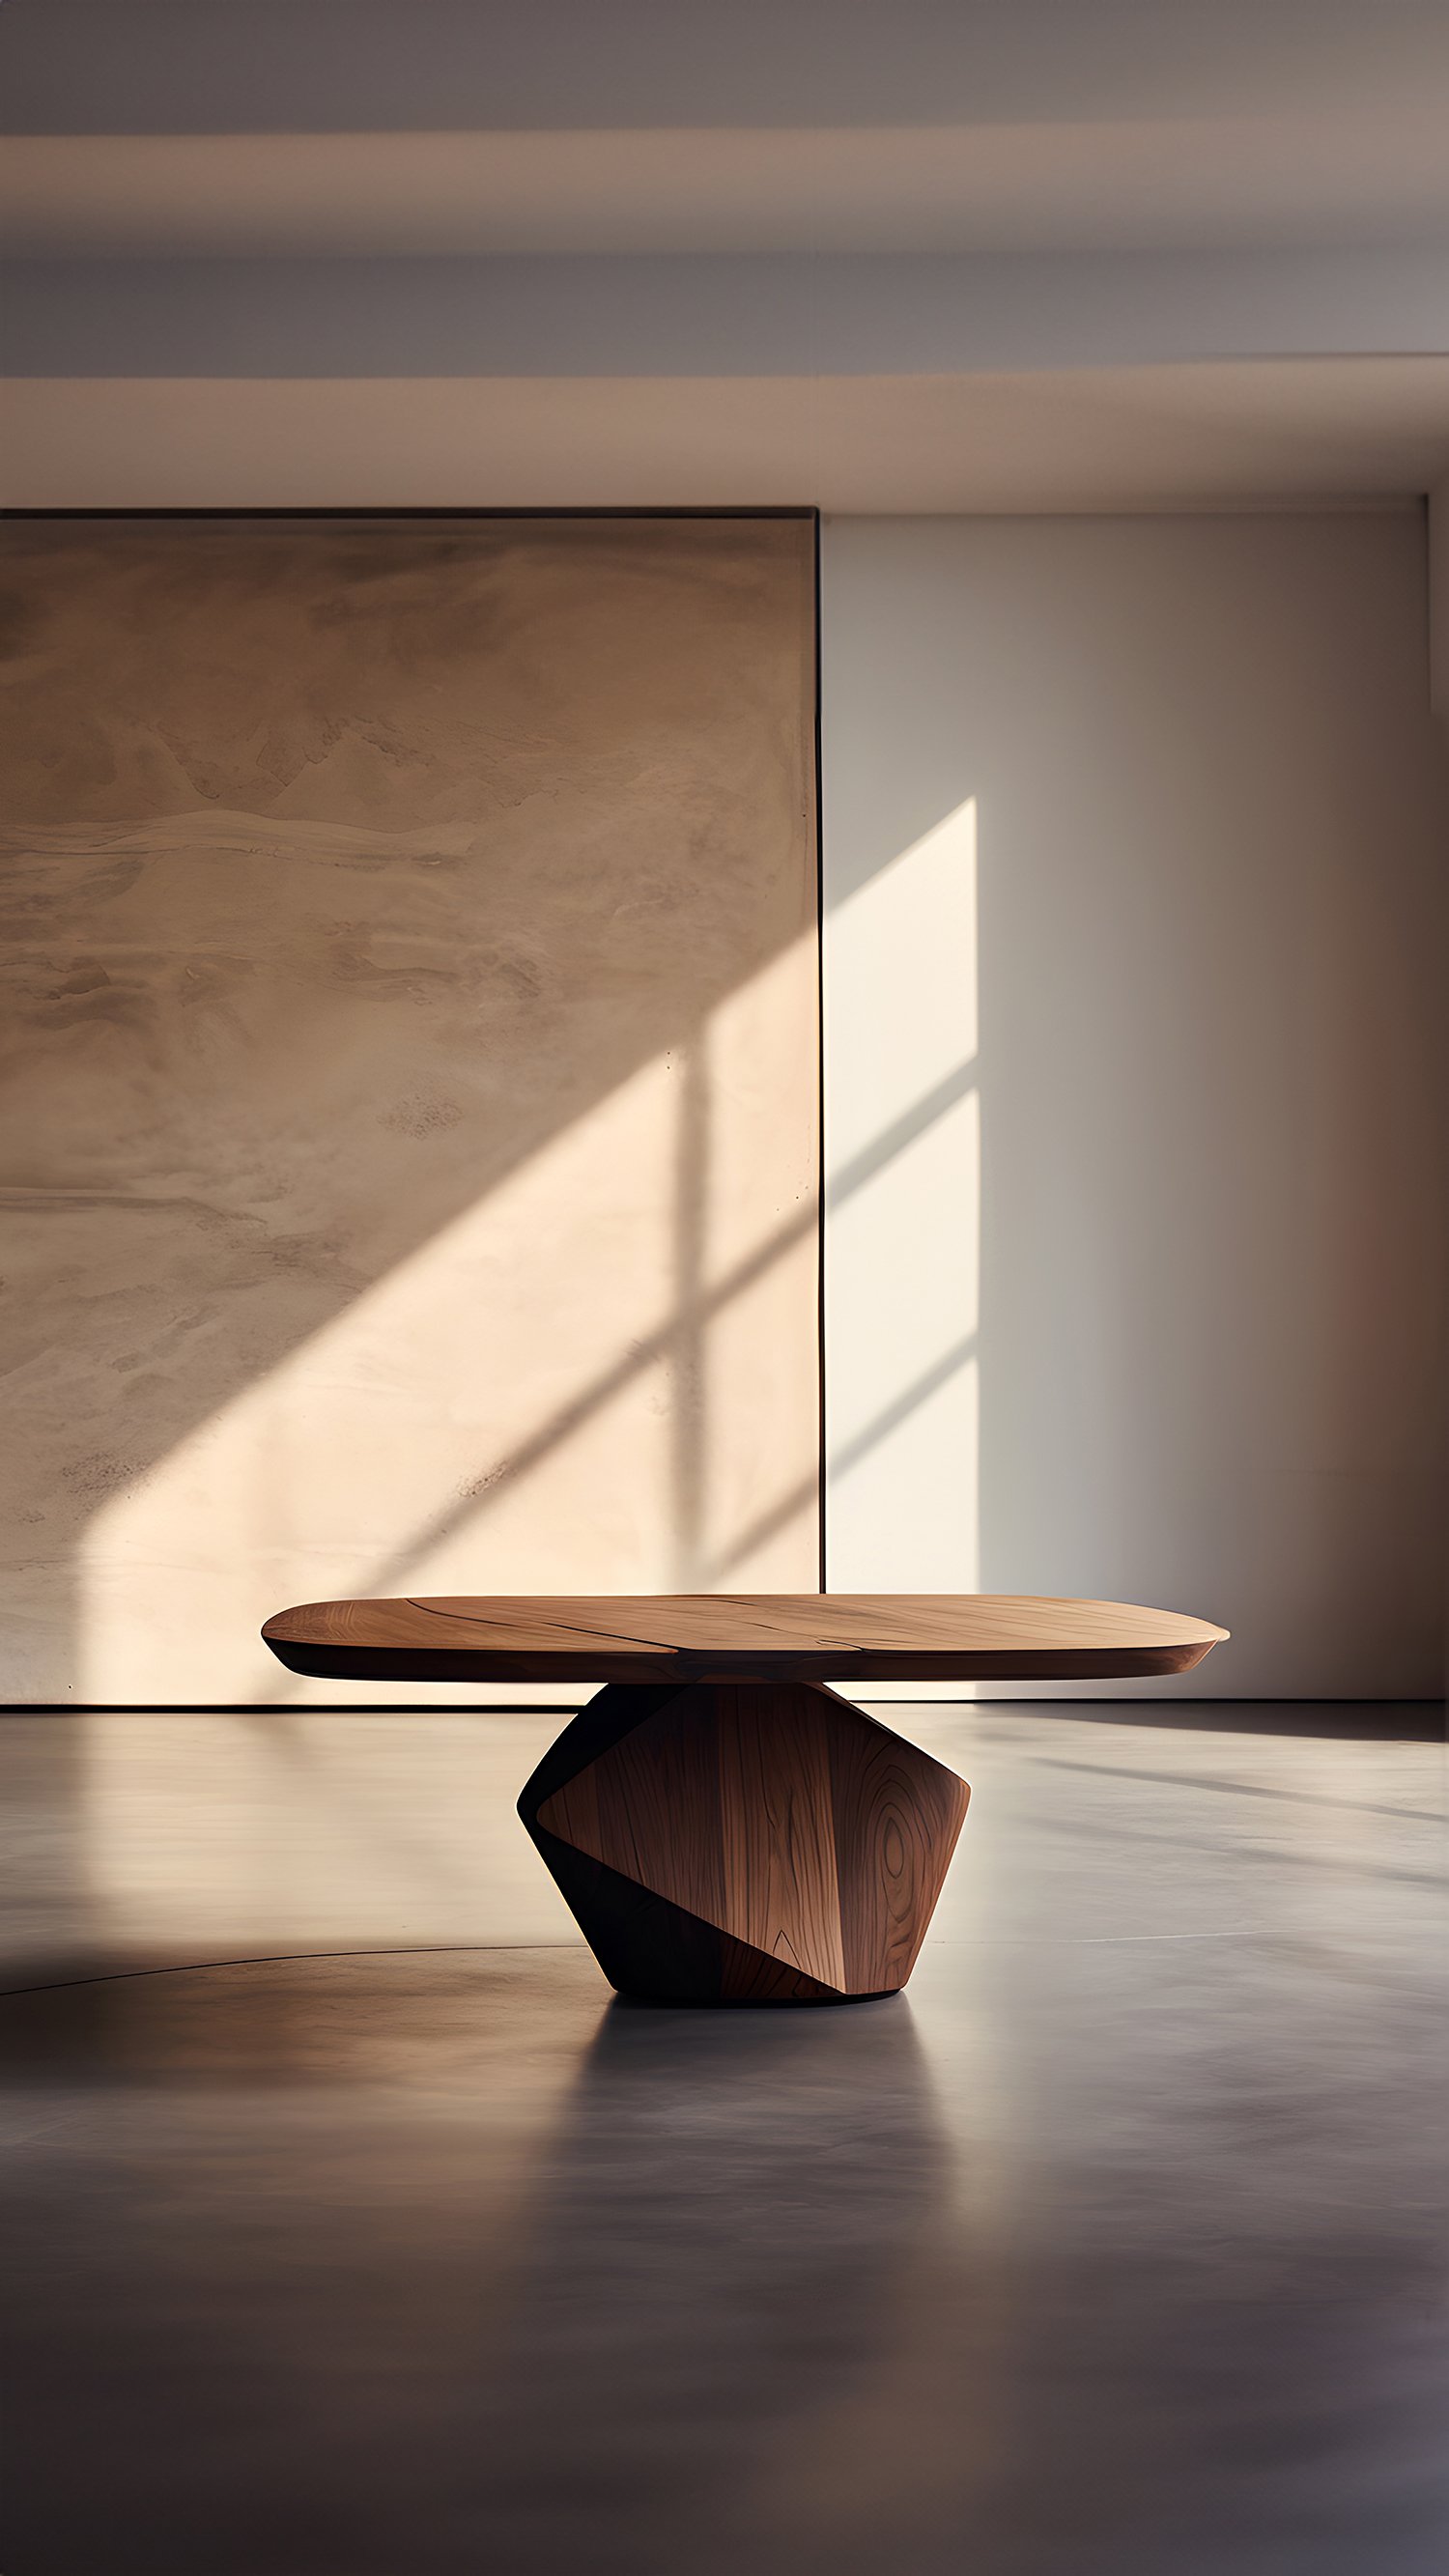 Sculptural Coffee Table Made of Solid Wood, Center Table Solace S30 by Joel Escalona — 6.jpg